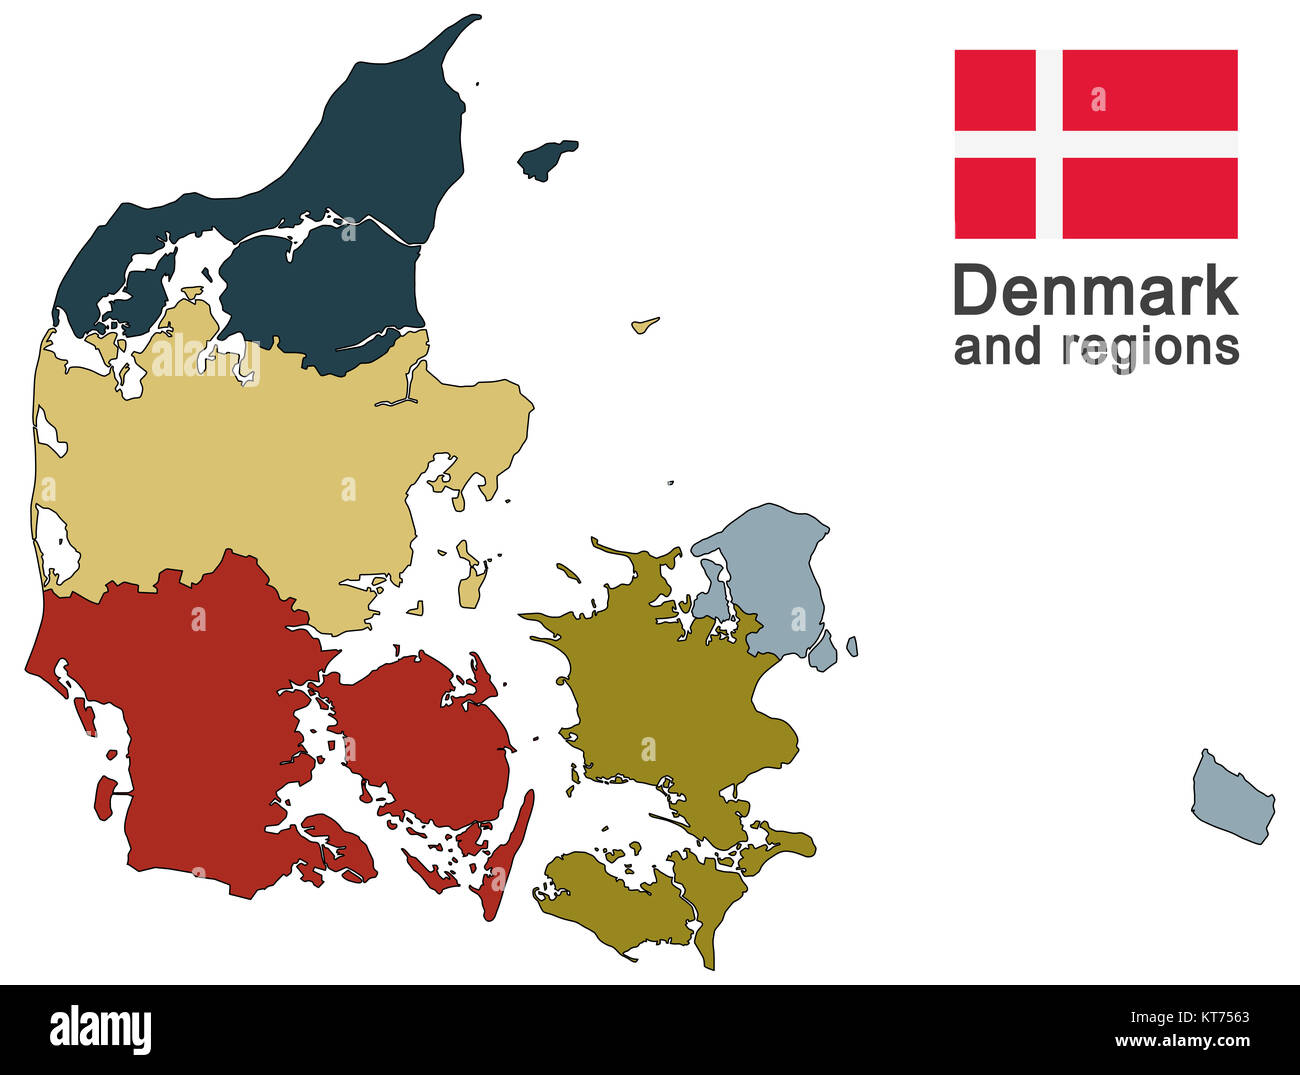 country denmark and regions Stock Photo - Alamy